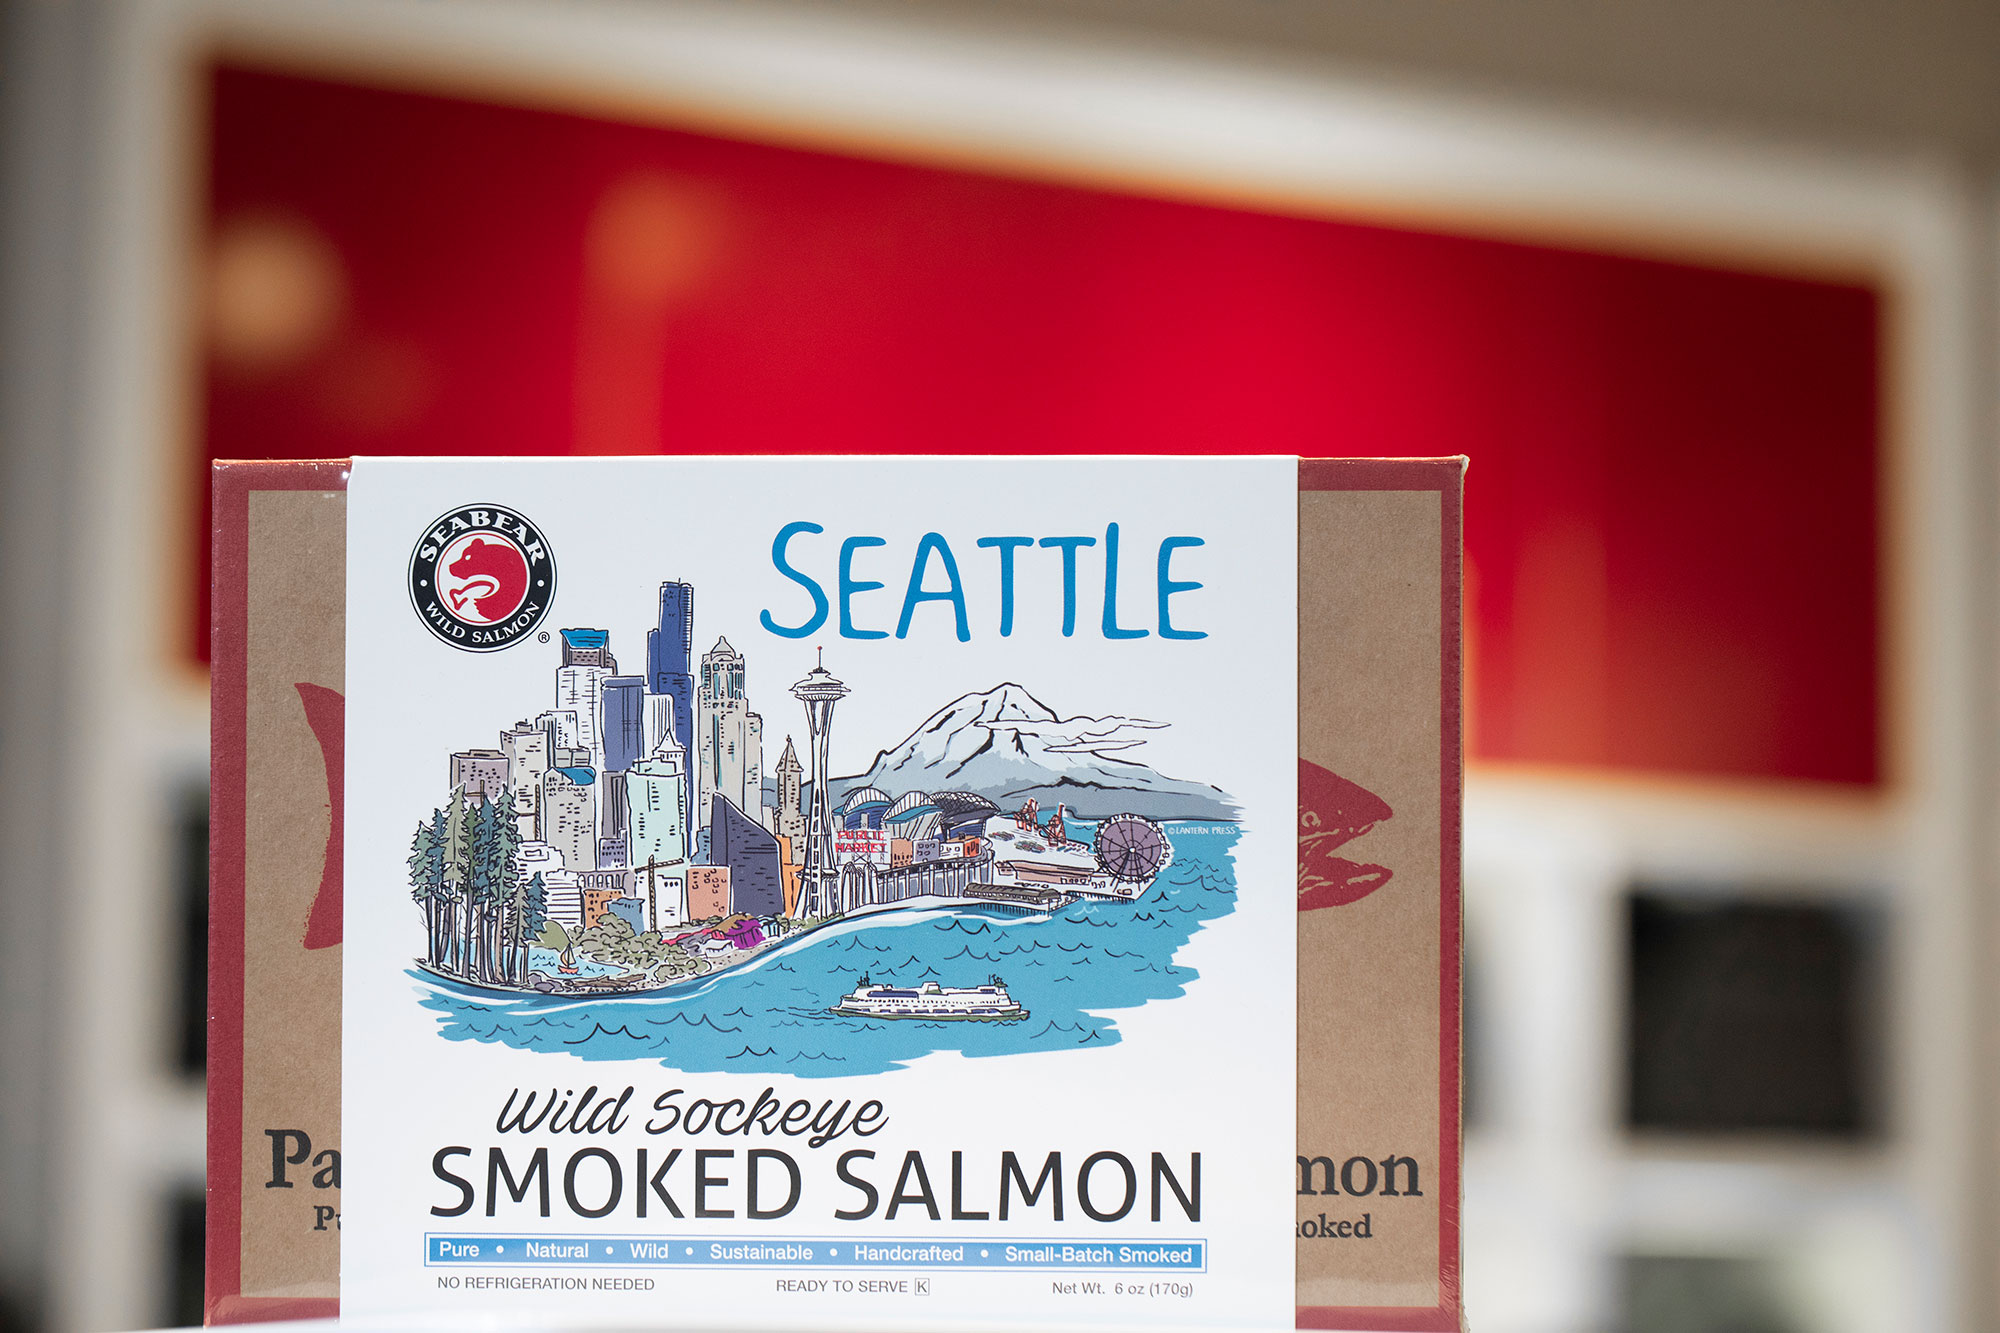 SEA Dufry Duty Free Smoked Salmon Product